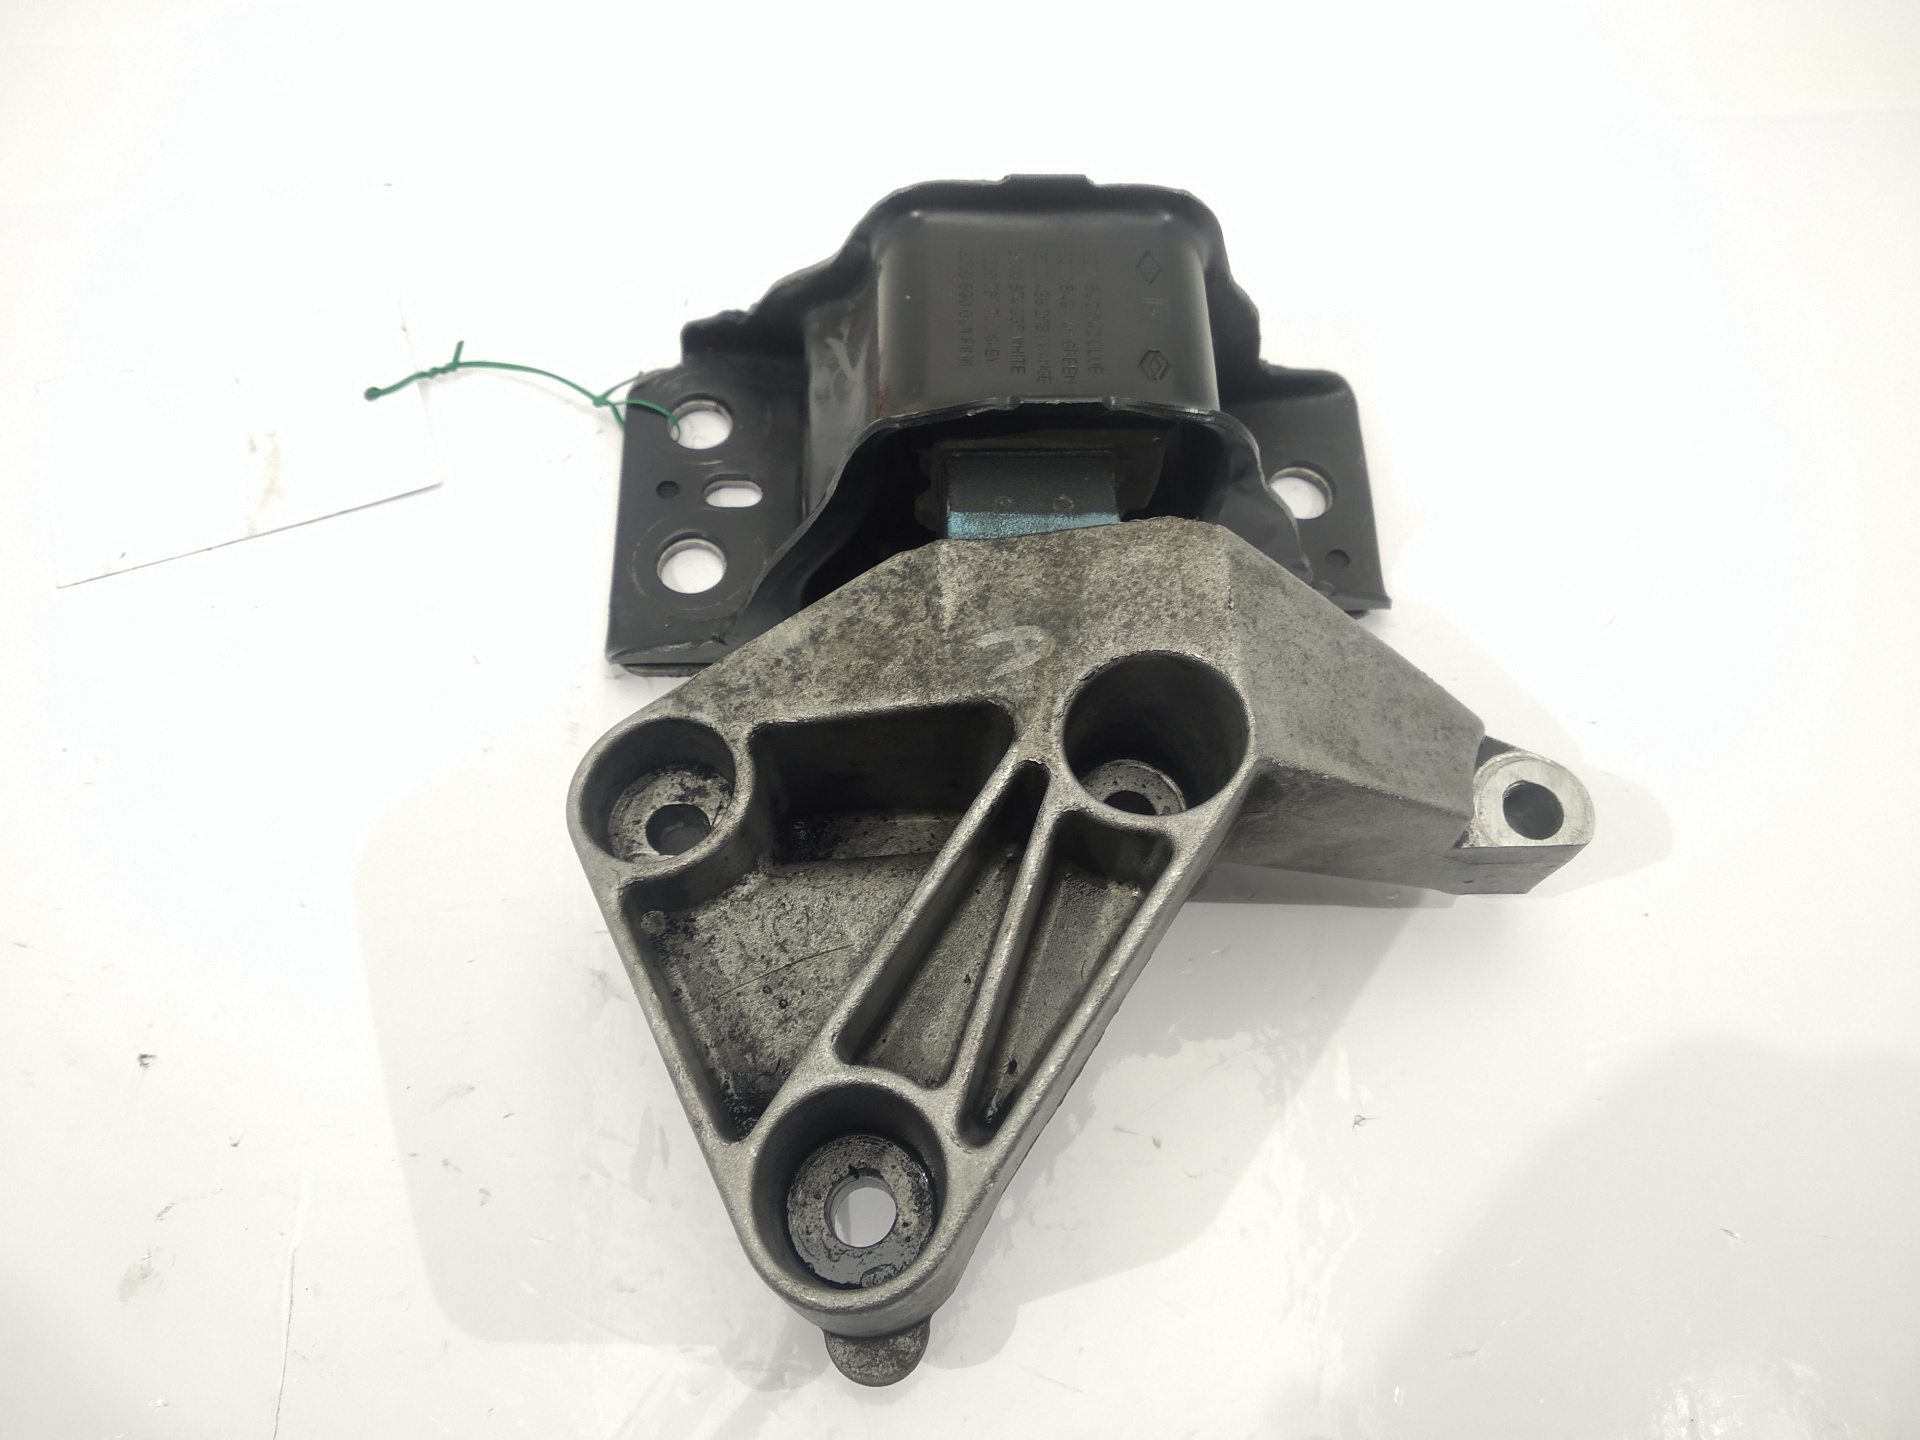 RENAULT Scenic 2 generation (2003-2010) Right Side Engine Mount 8200592642, 8200592642, 8200592642 24513057